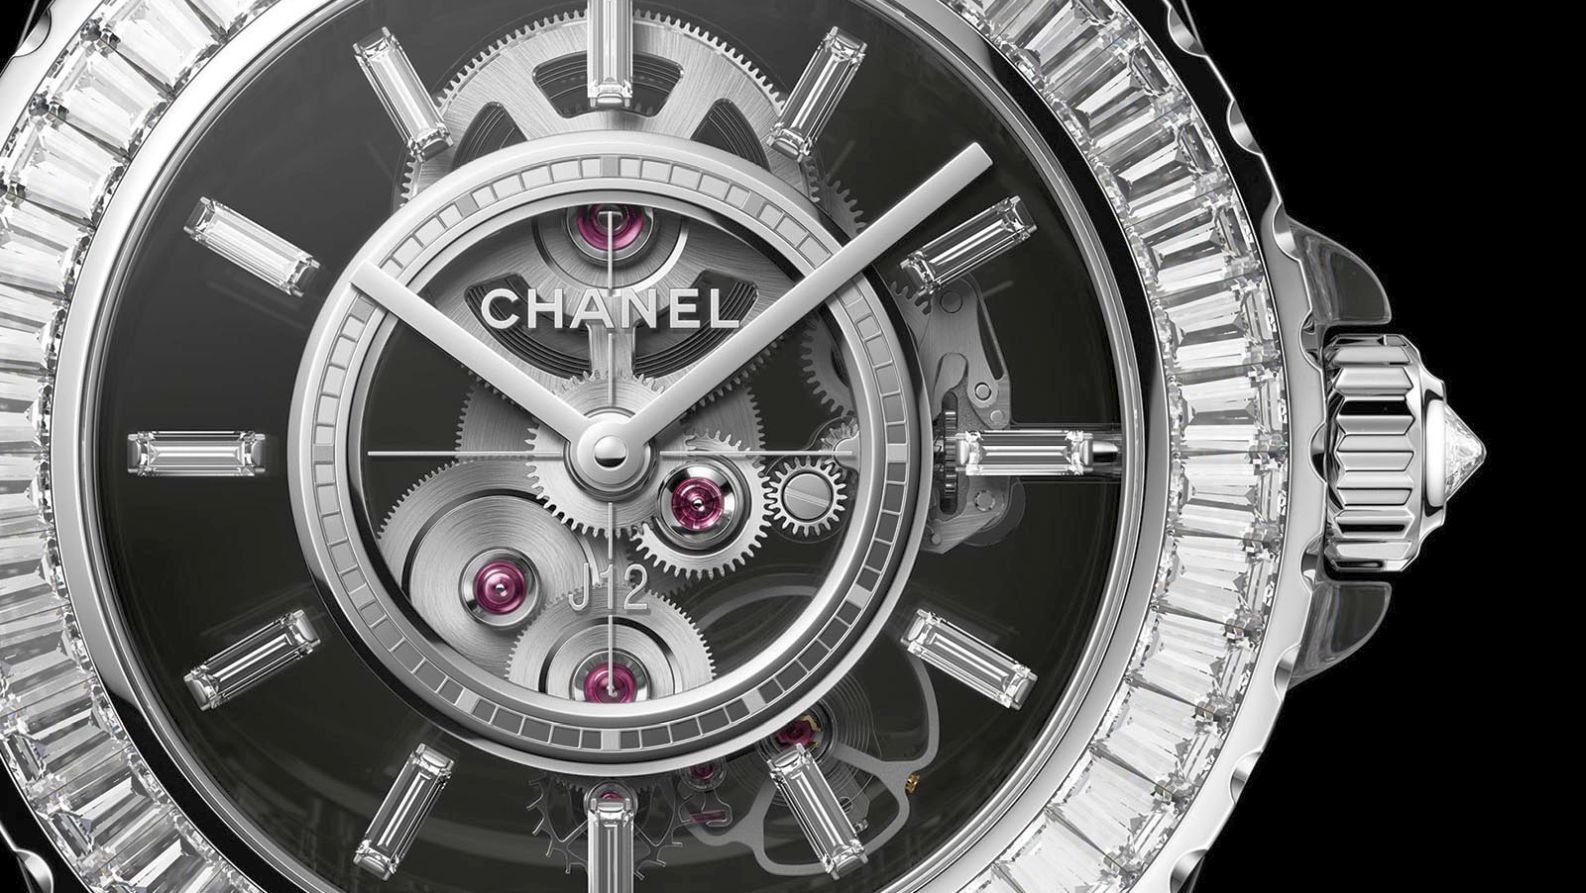 Chanel unveils new limited edition models to celebrate 20 years of the J12